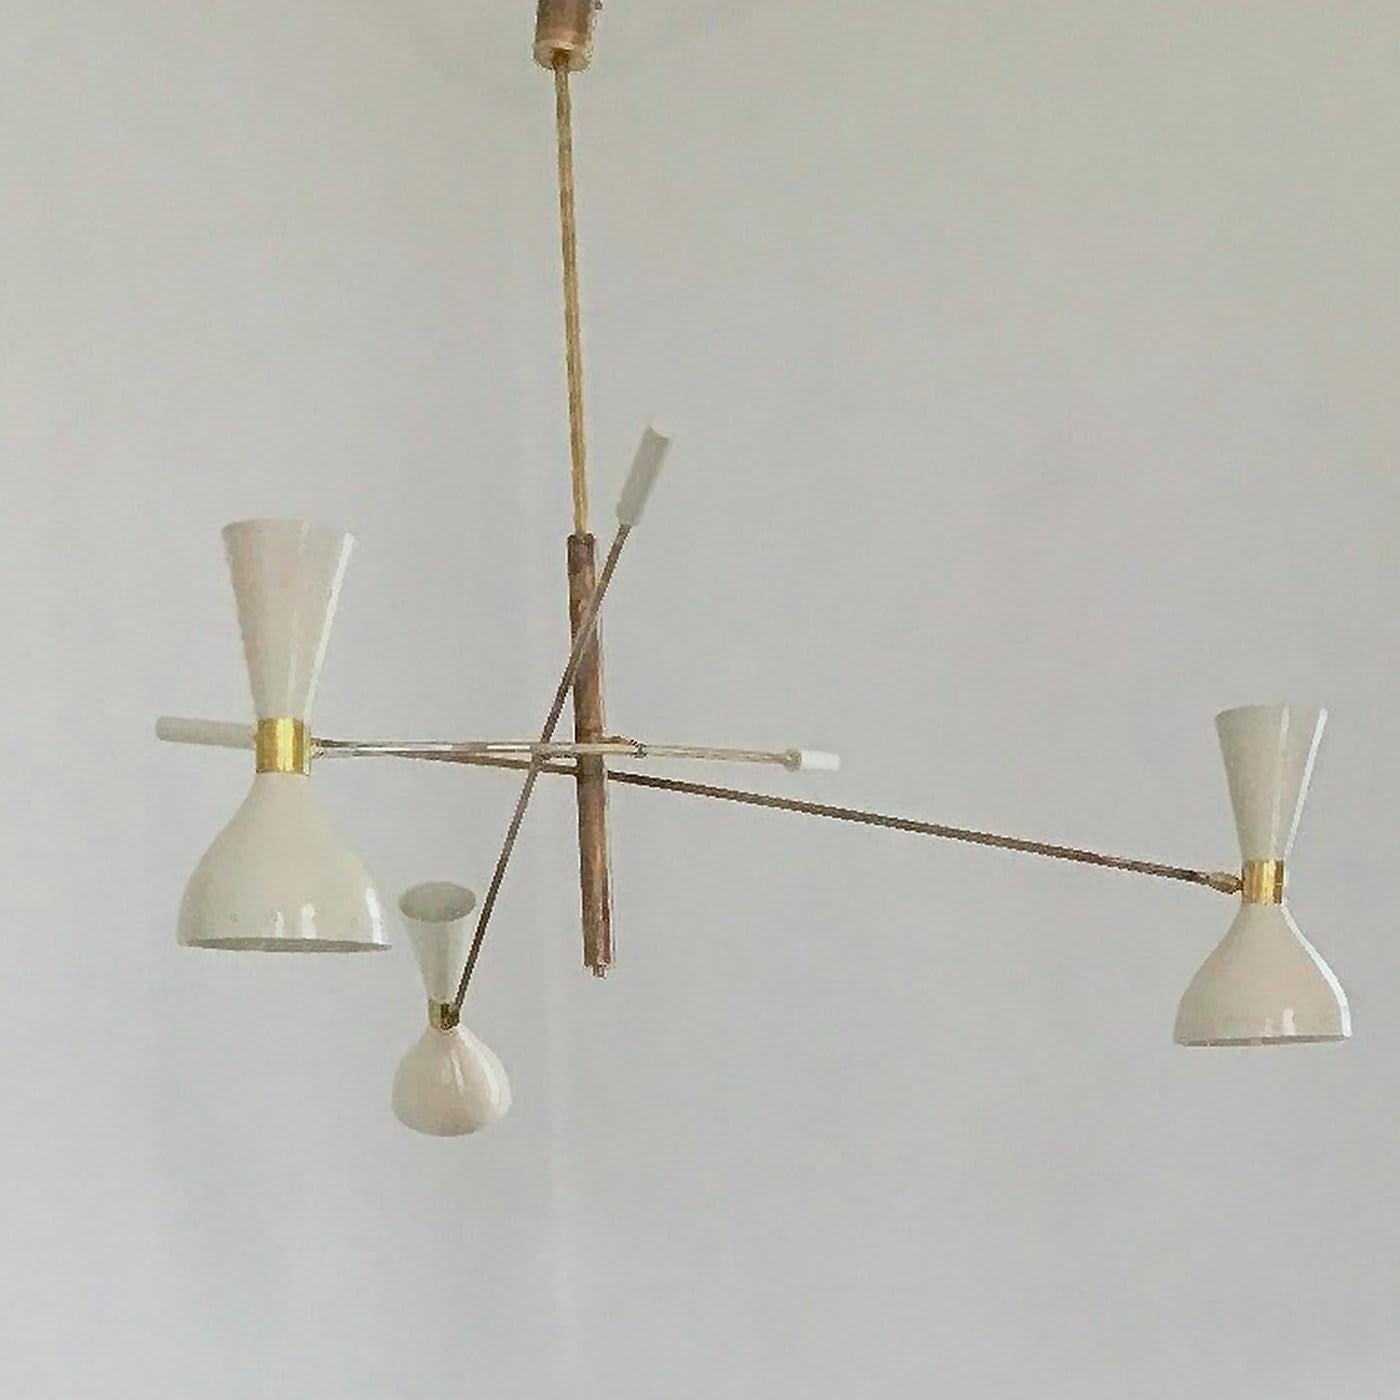 A magnificent interpretation of mid-century style, this three-arm chandelier combines the warm glow of natural solid brass with the ivory-hued aluminum of its three double shades. This unique structure features counterweights to adjust the position